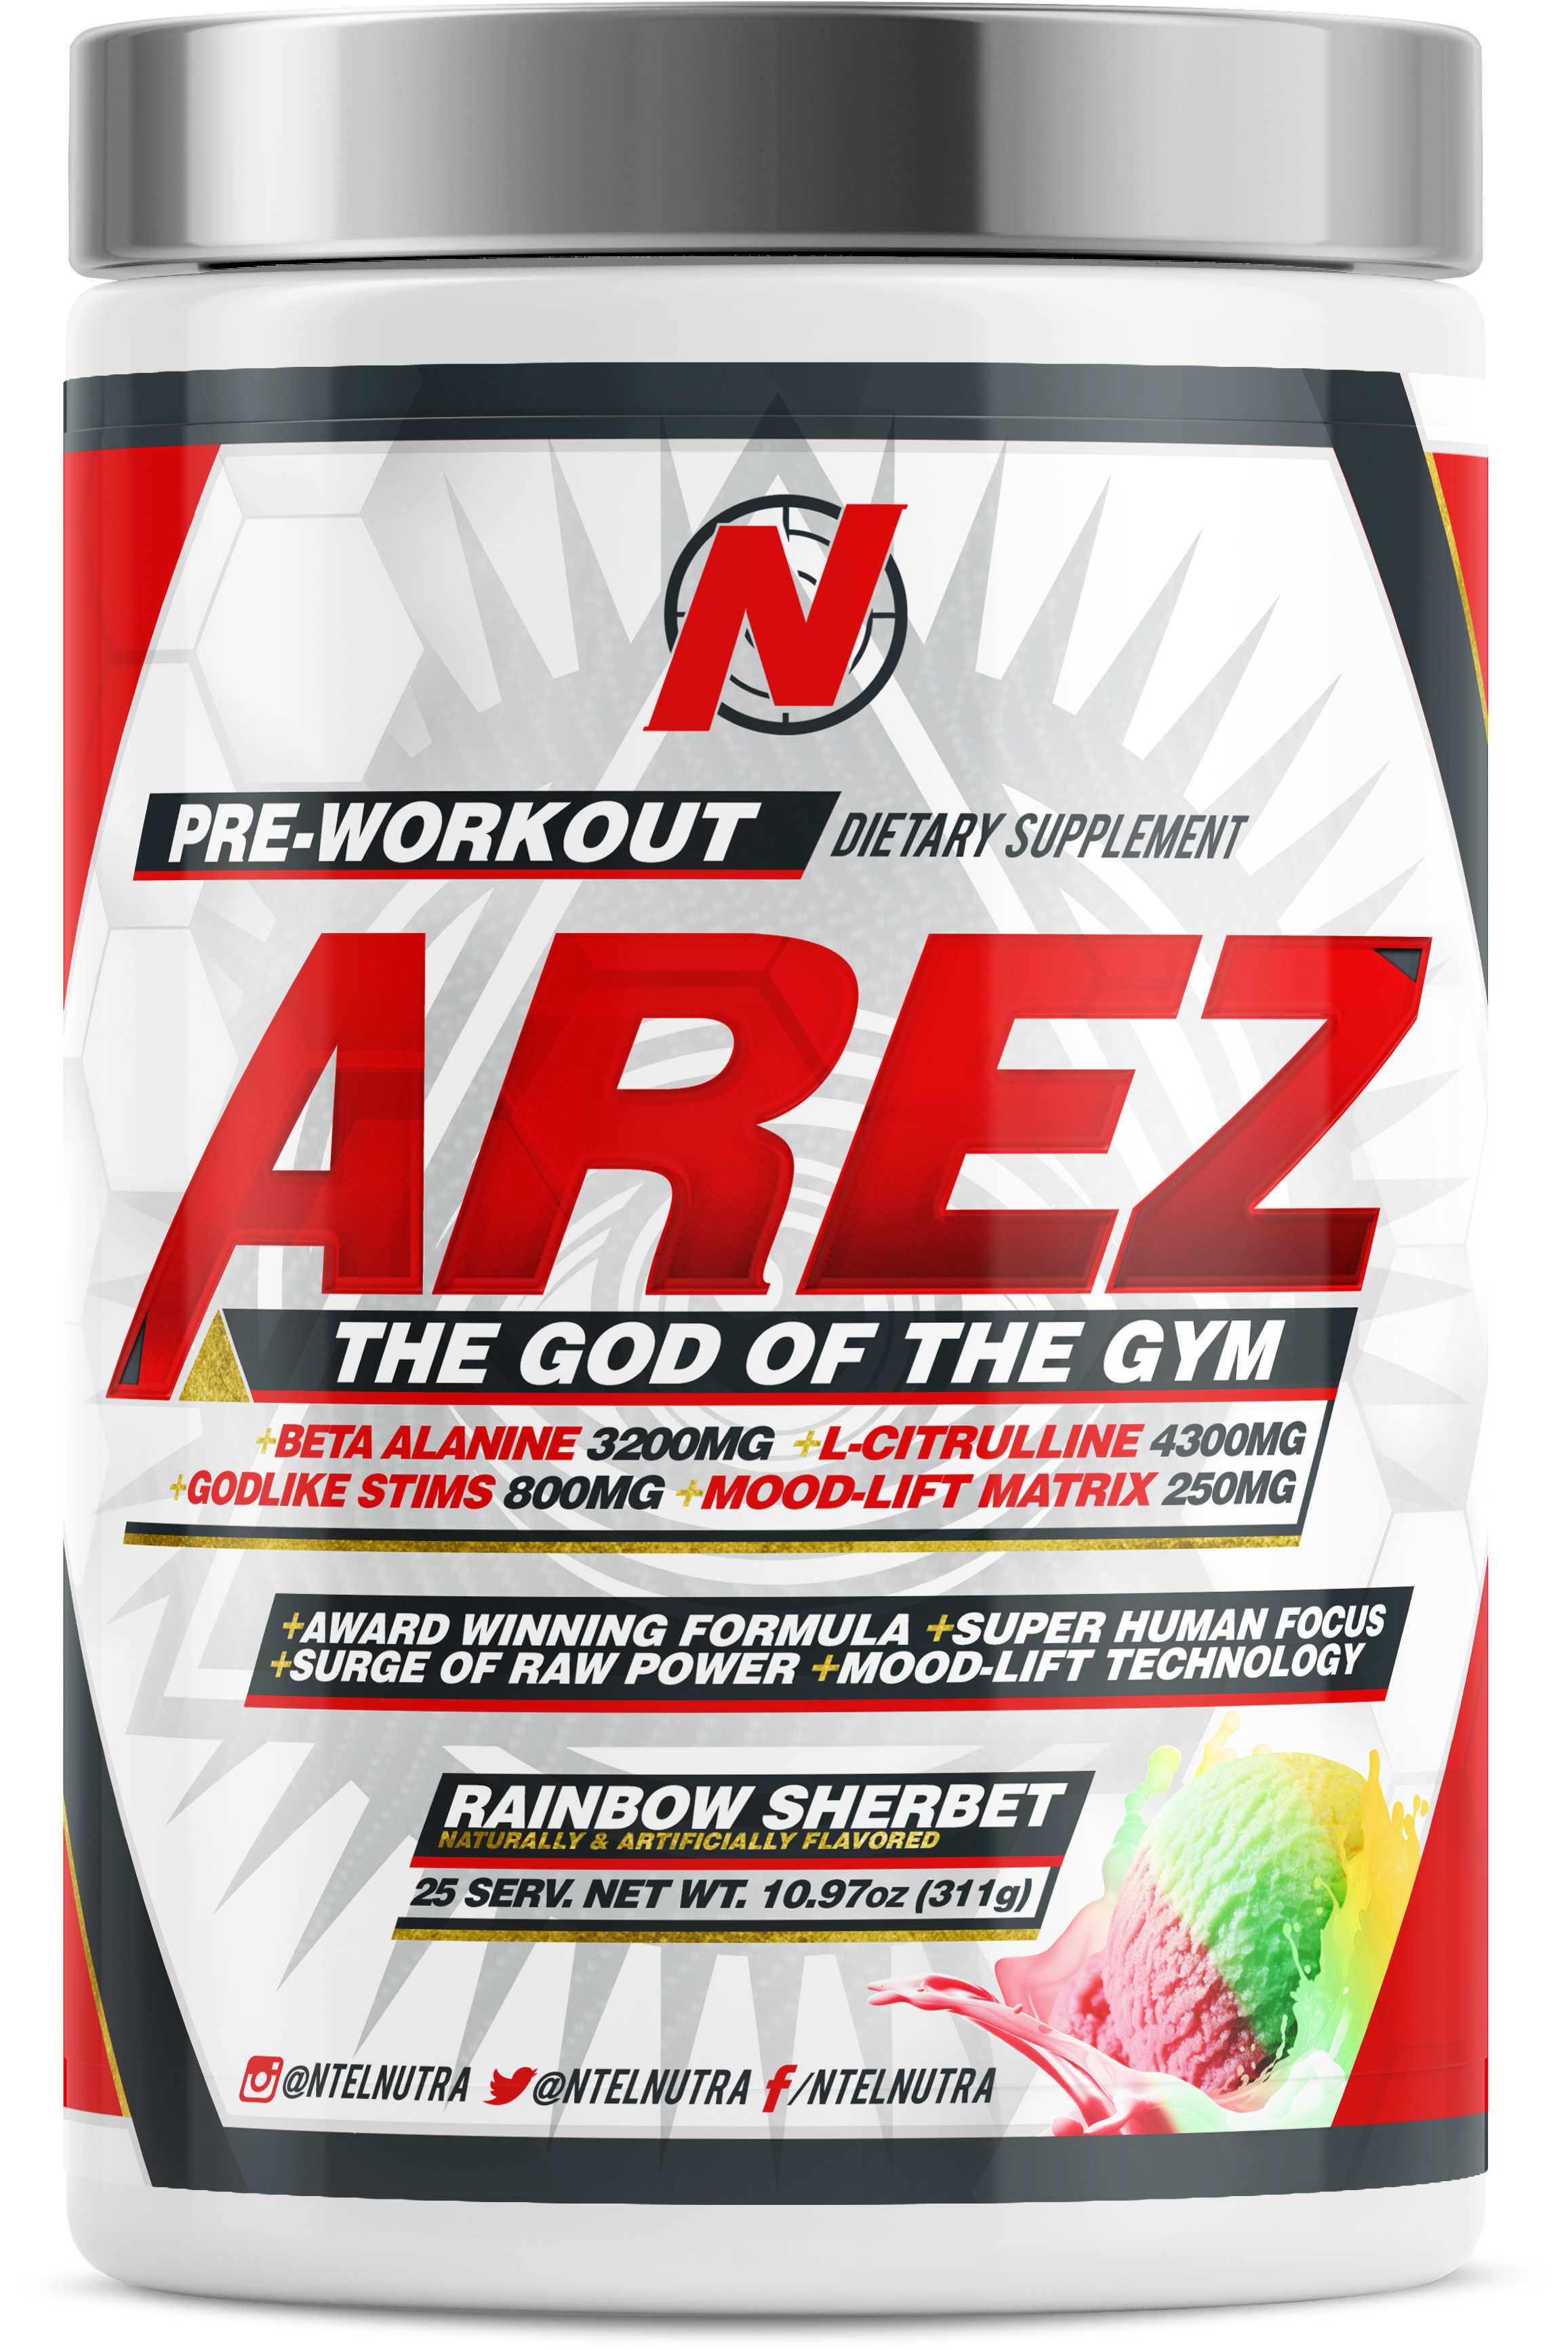 6 Day Arez god of the gym pre workout 